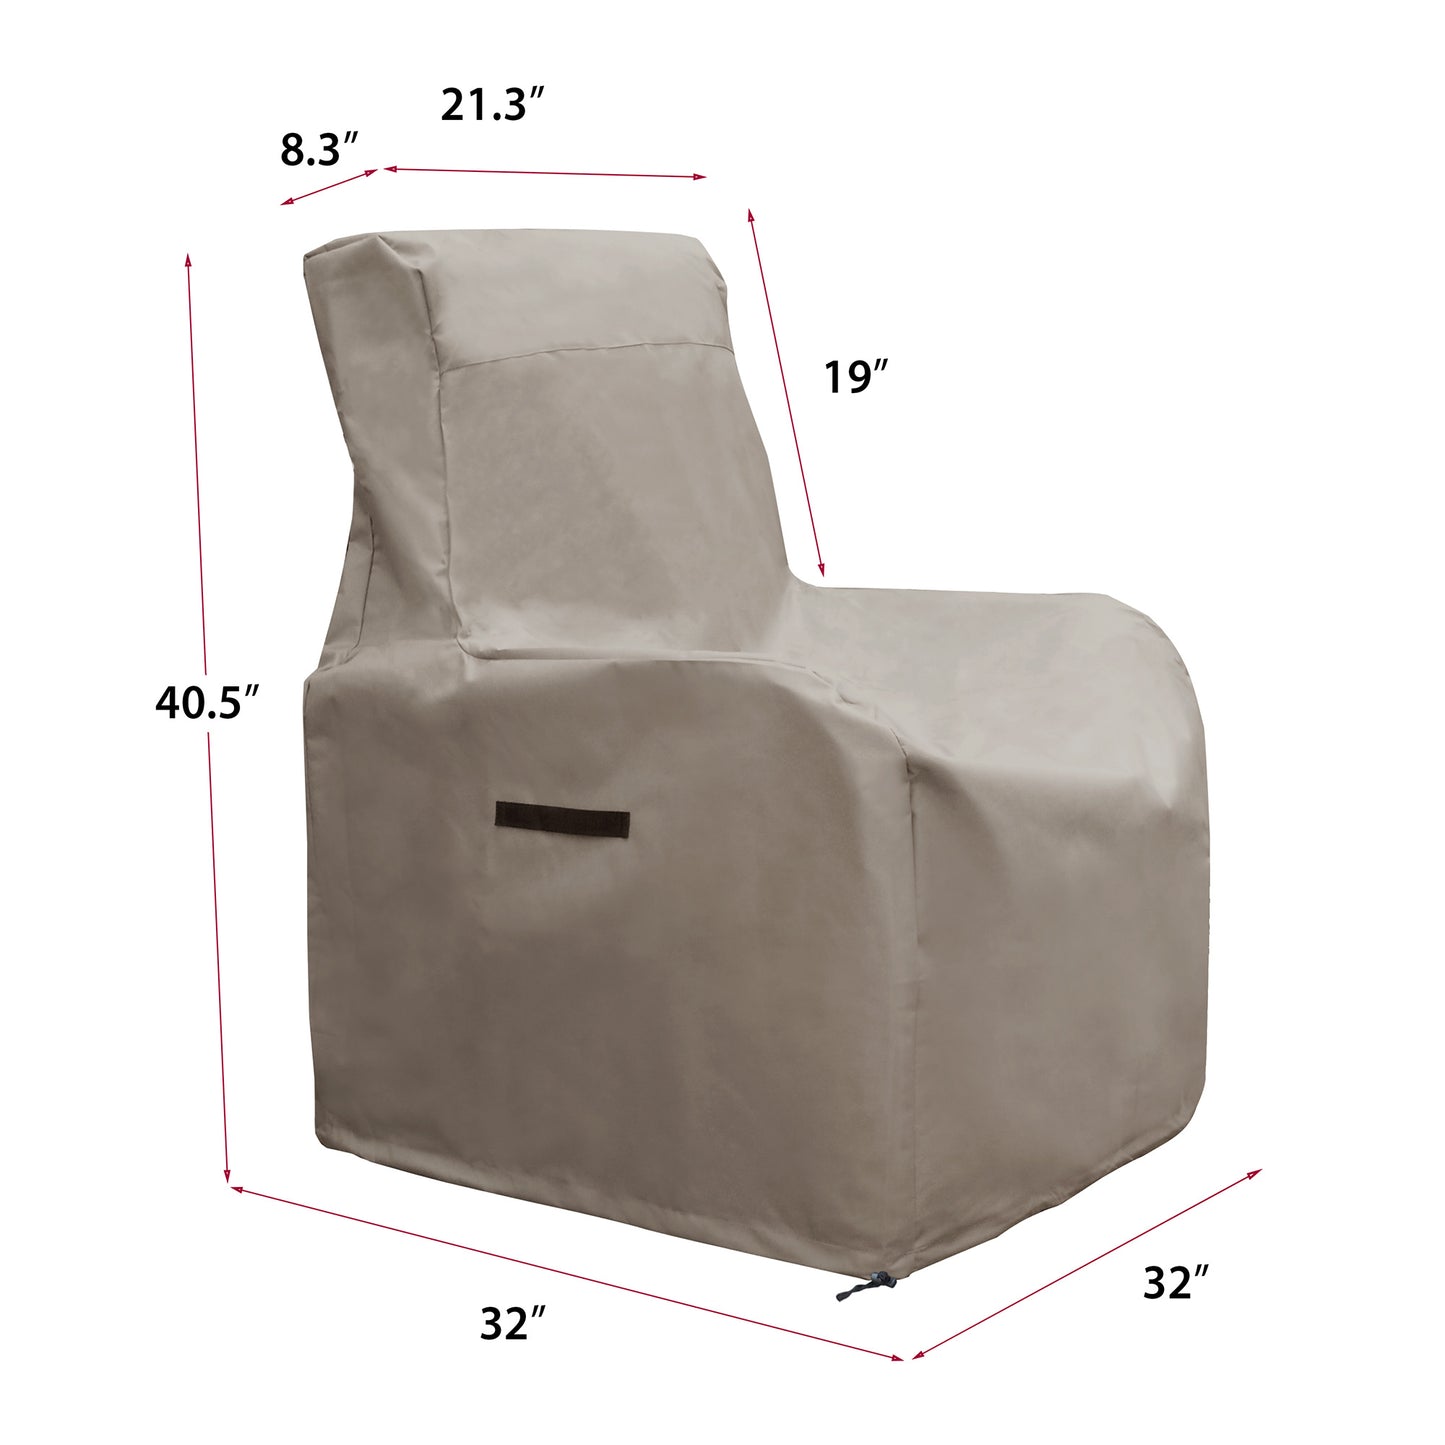 Outdoor Protective Cover;  Outdoor Patio Furniture Chair Protective Storage Cover;  Durable and Water Protected Outdoor Armchair Cover